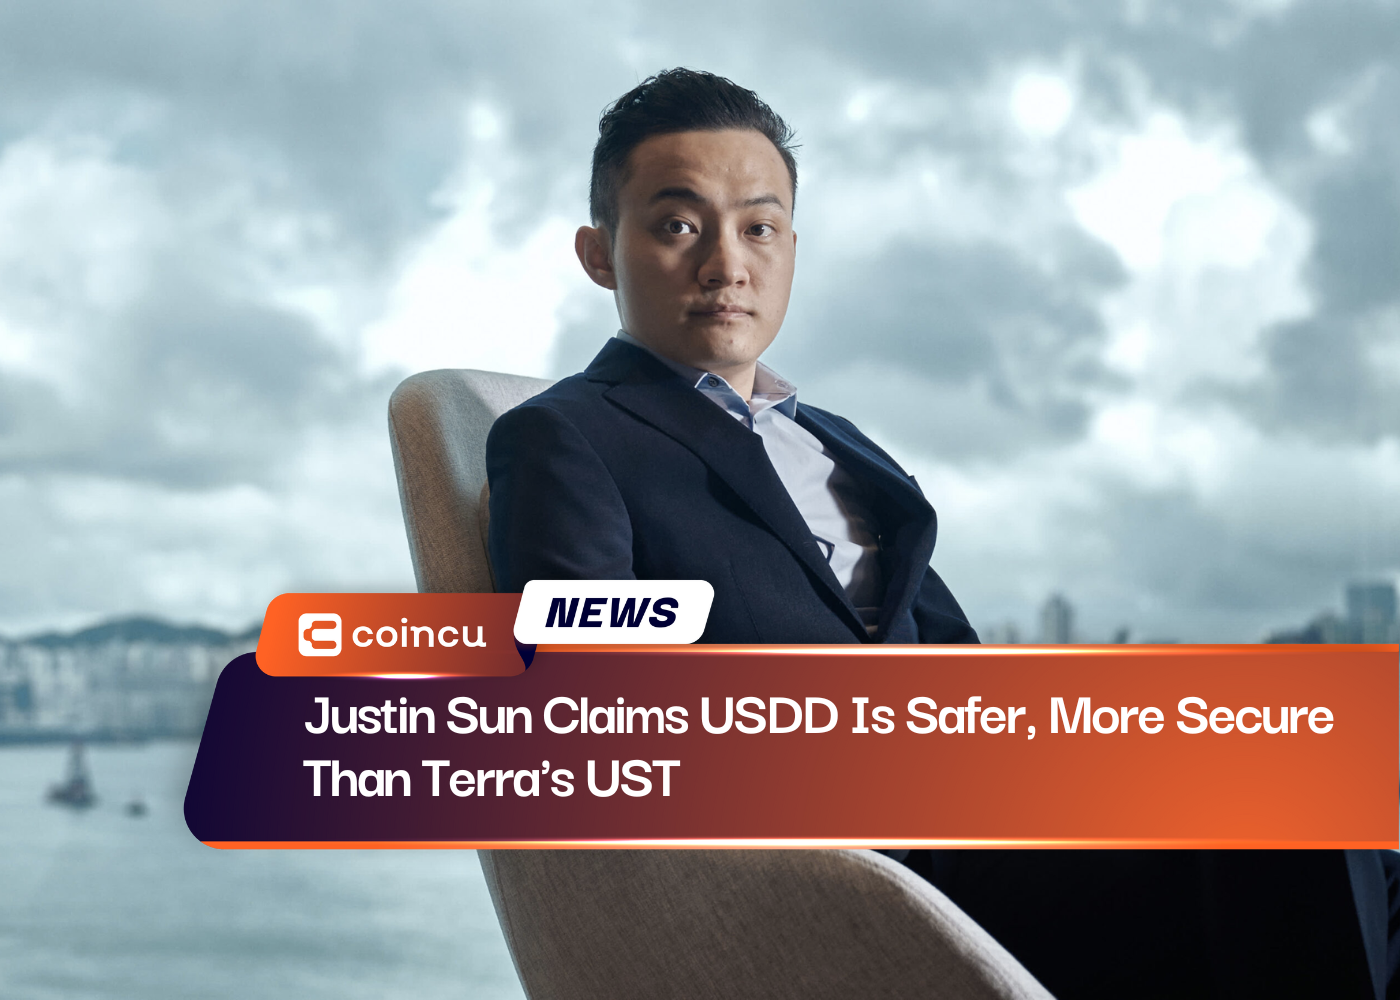 Justin Sun Claims USDD Is Safer, More Secure Than Terra's UST